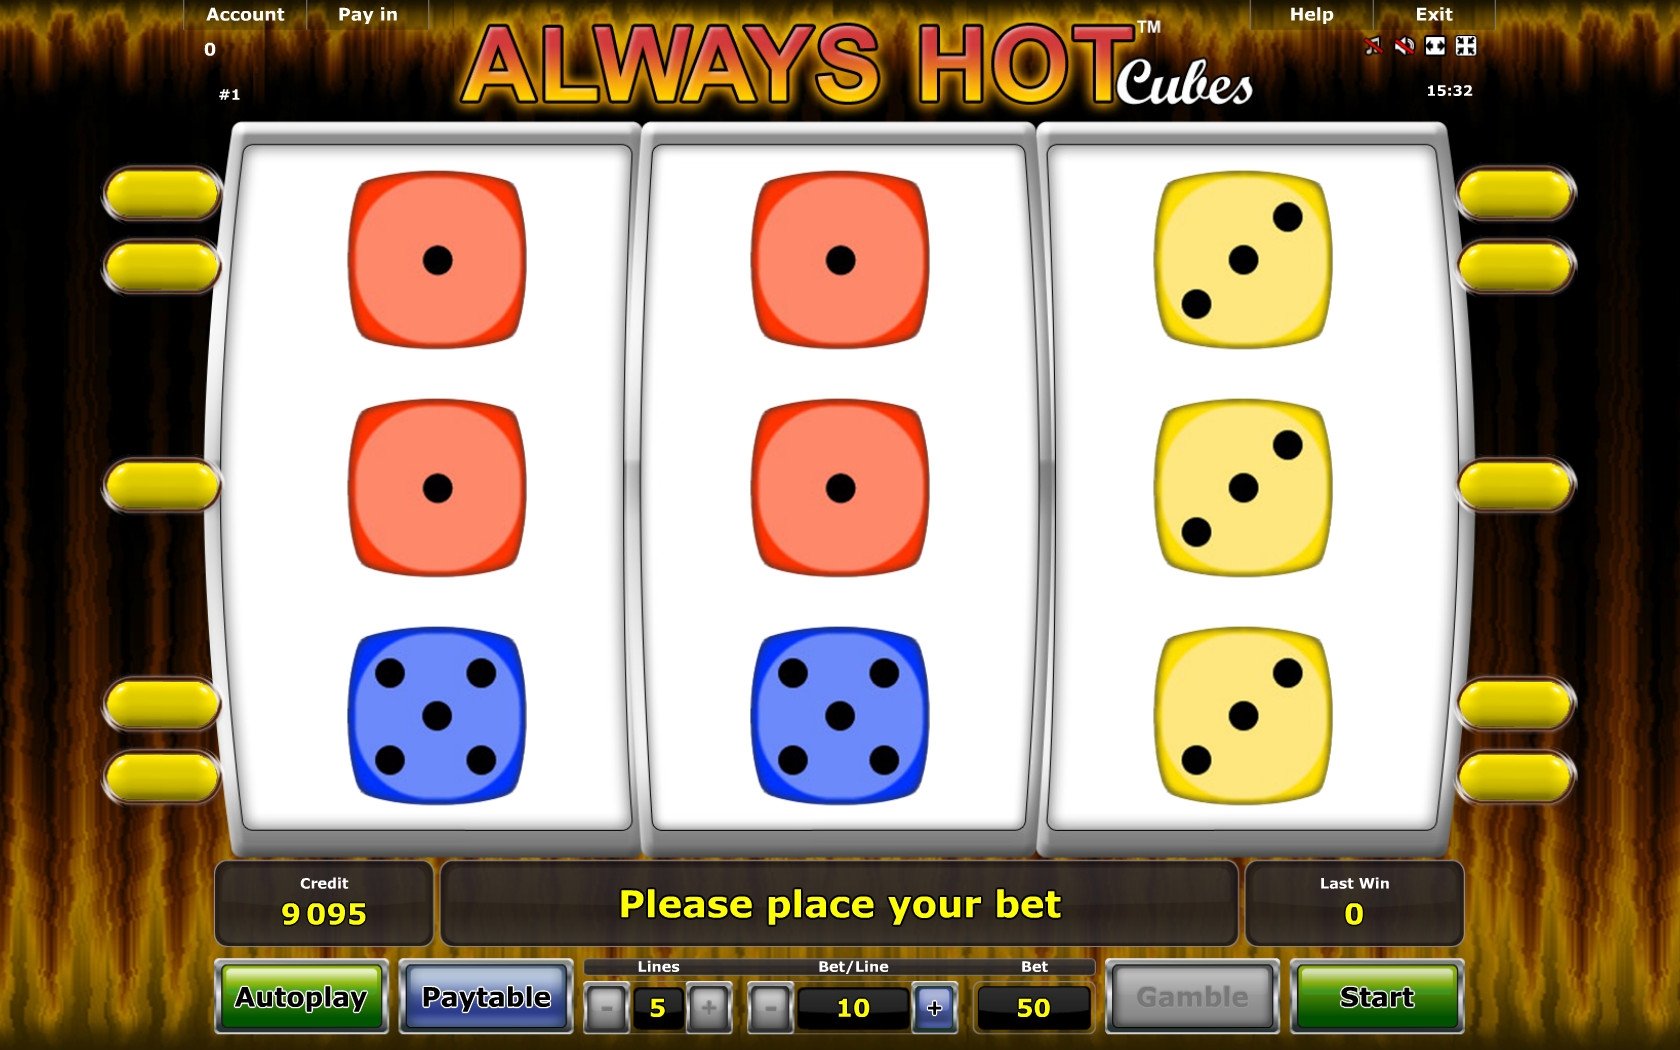 Always Hot Cubes (Always Hot Cubes) from category Slots